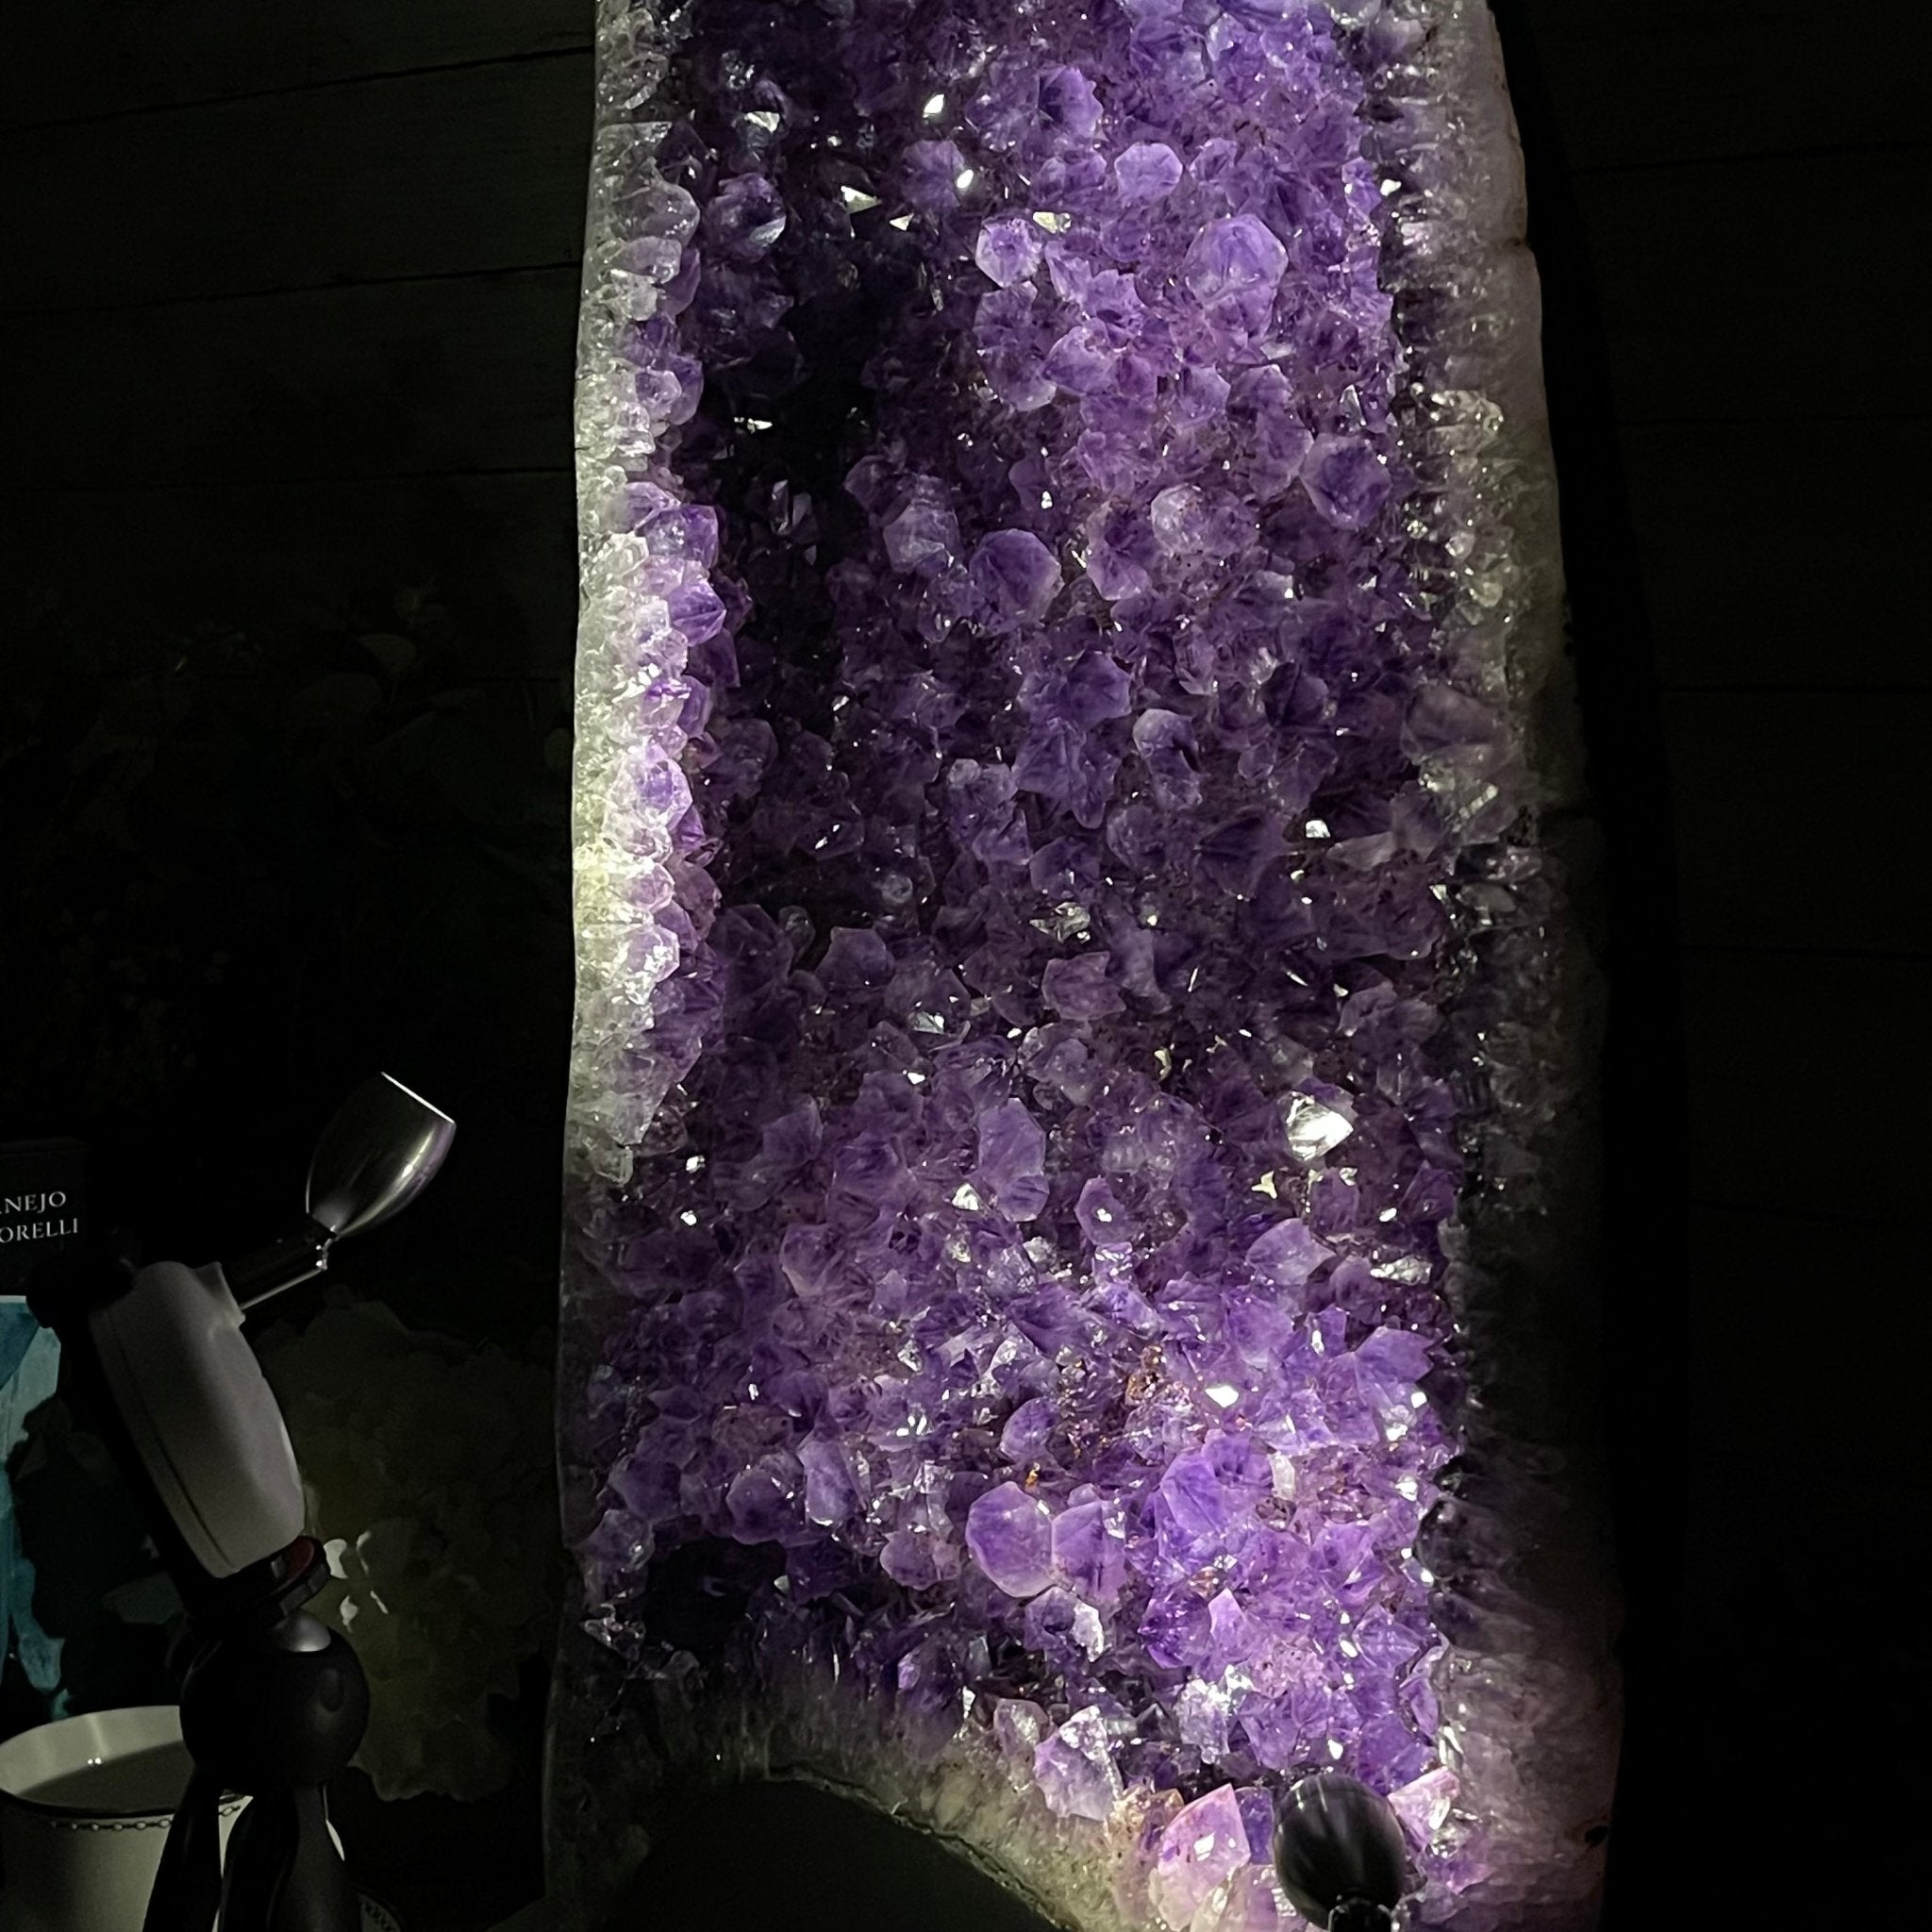 Super Quality Brazilian Amethyst Cathedral, 89.8 lbs & 27.2" Tall #5601-1170 by Brazil Gems - Brazil GemsBrazil GemsSuper Quality Brazilian Amethyst Cathedral, 89.8 lbs & 27.2" Tall #5601-1170 by Brazil GemsCathedrals5601-1170